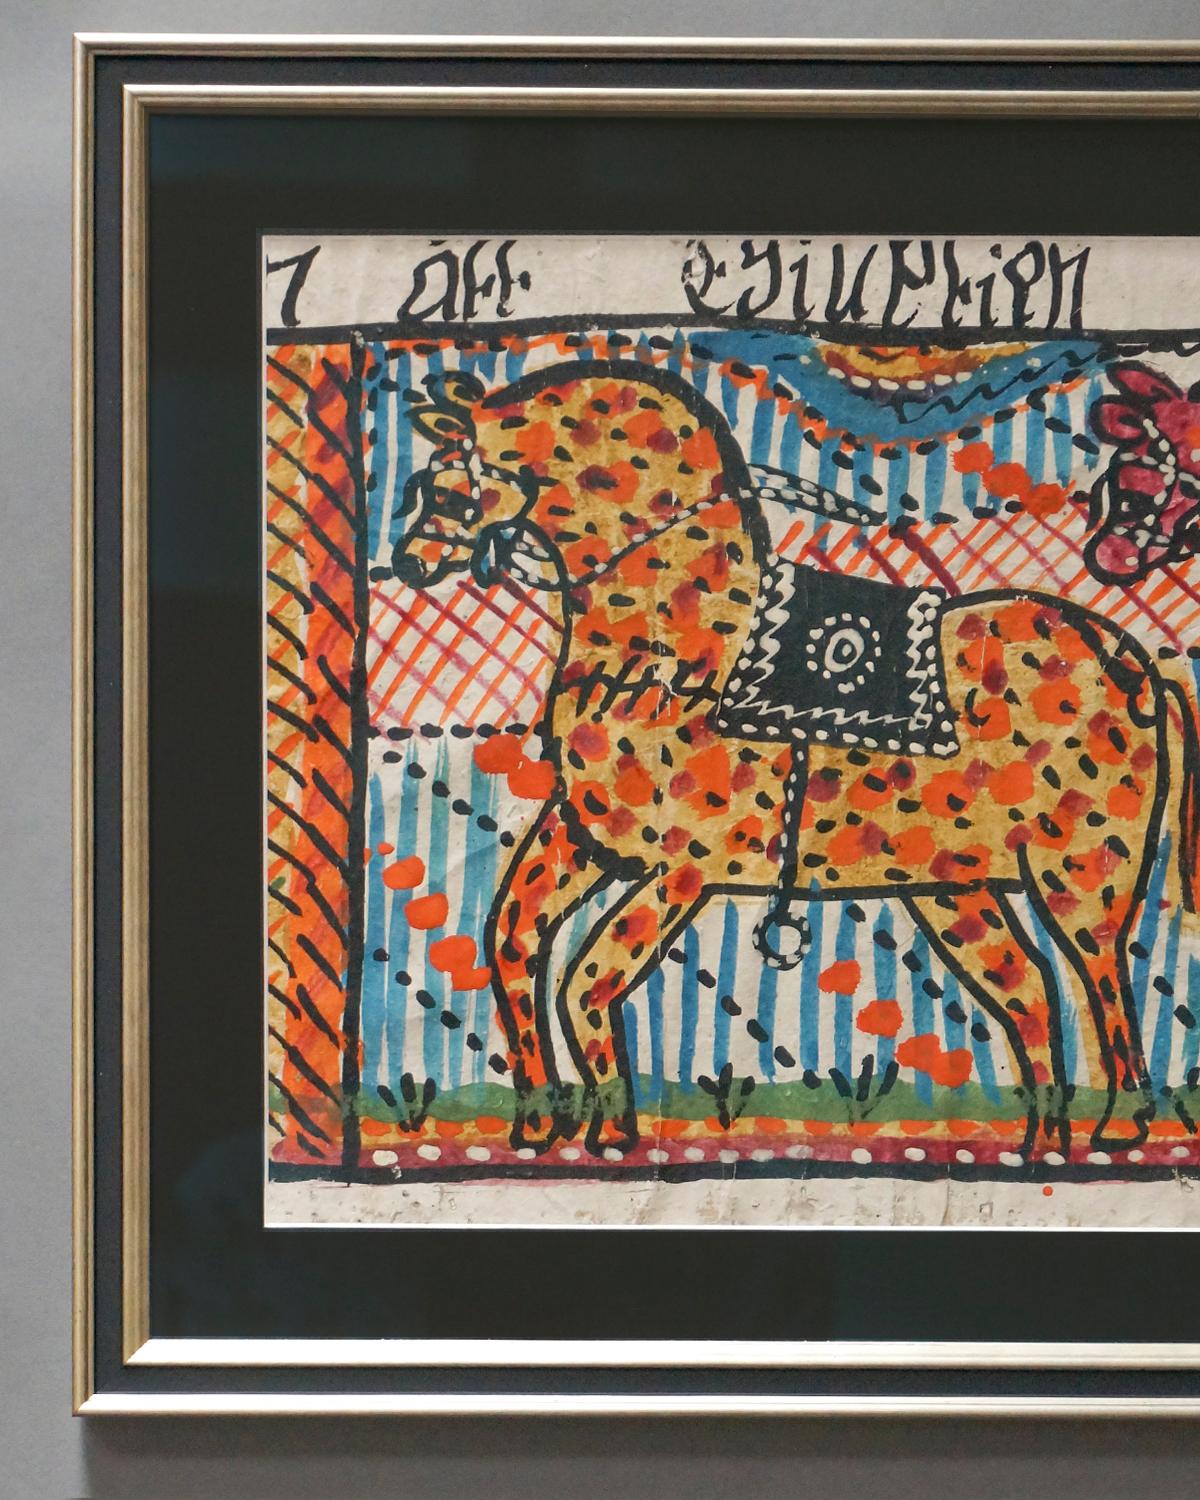 Fragment of a Swedish bonad, circa 1830, showing three saddled horses, part of a longer row. This is probably an illustration of Joseph’s brothers coming to him in Egypt for relief from famine. Painted in bright colors in the naïf style of Southern